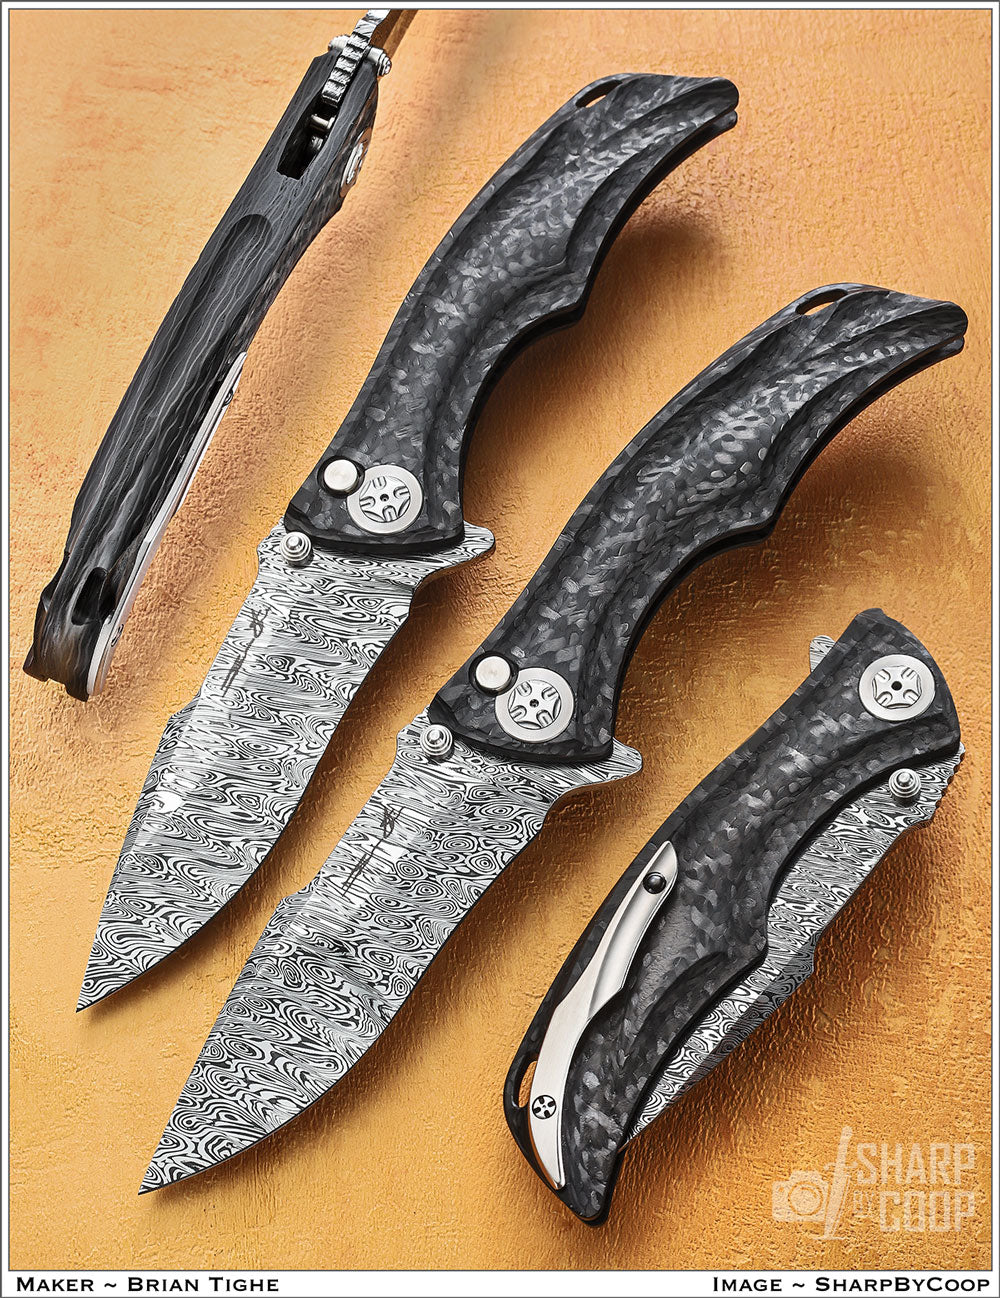 Tighe Down Carbon Fiber Integral’s With Damasteel Blades